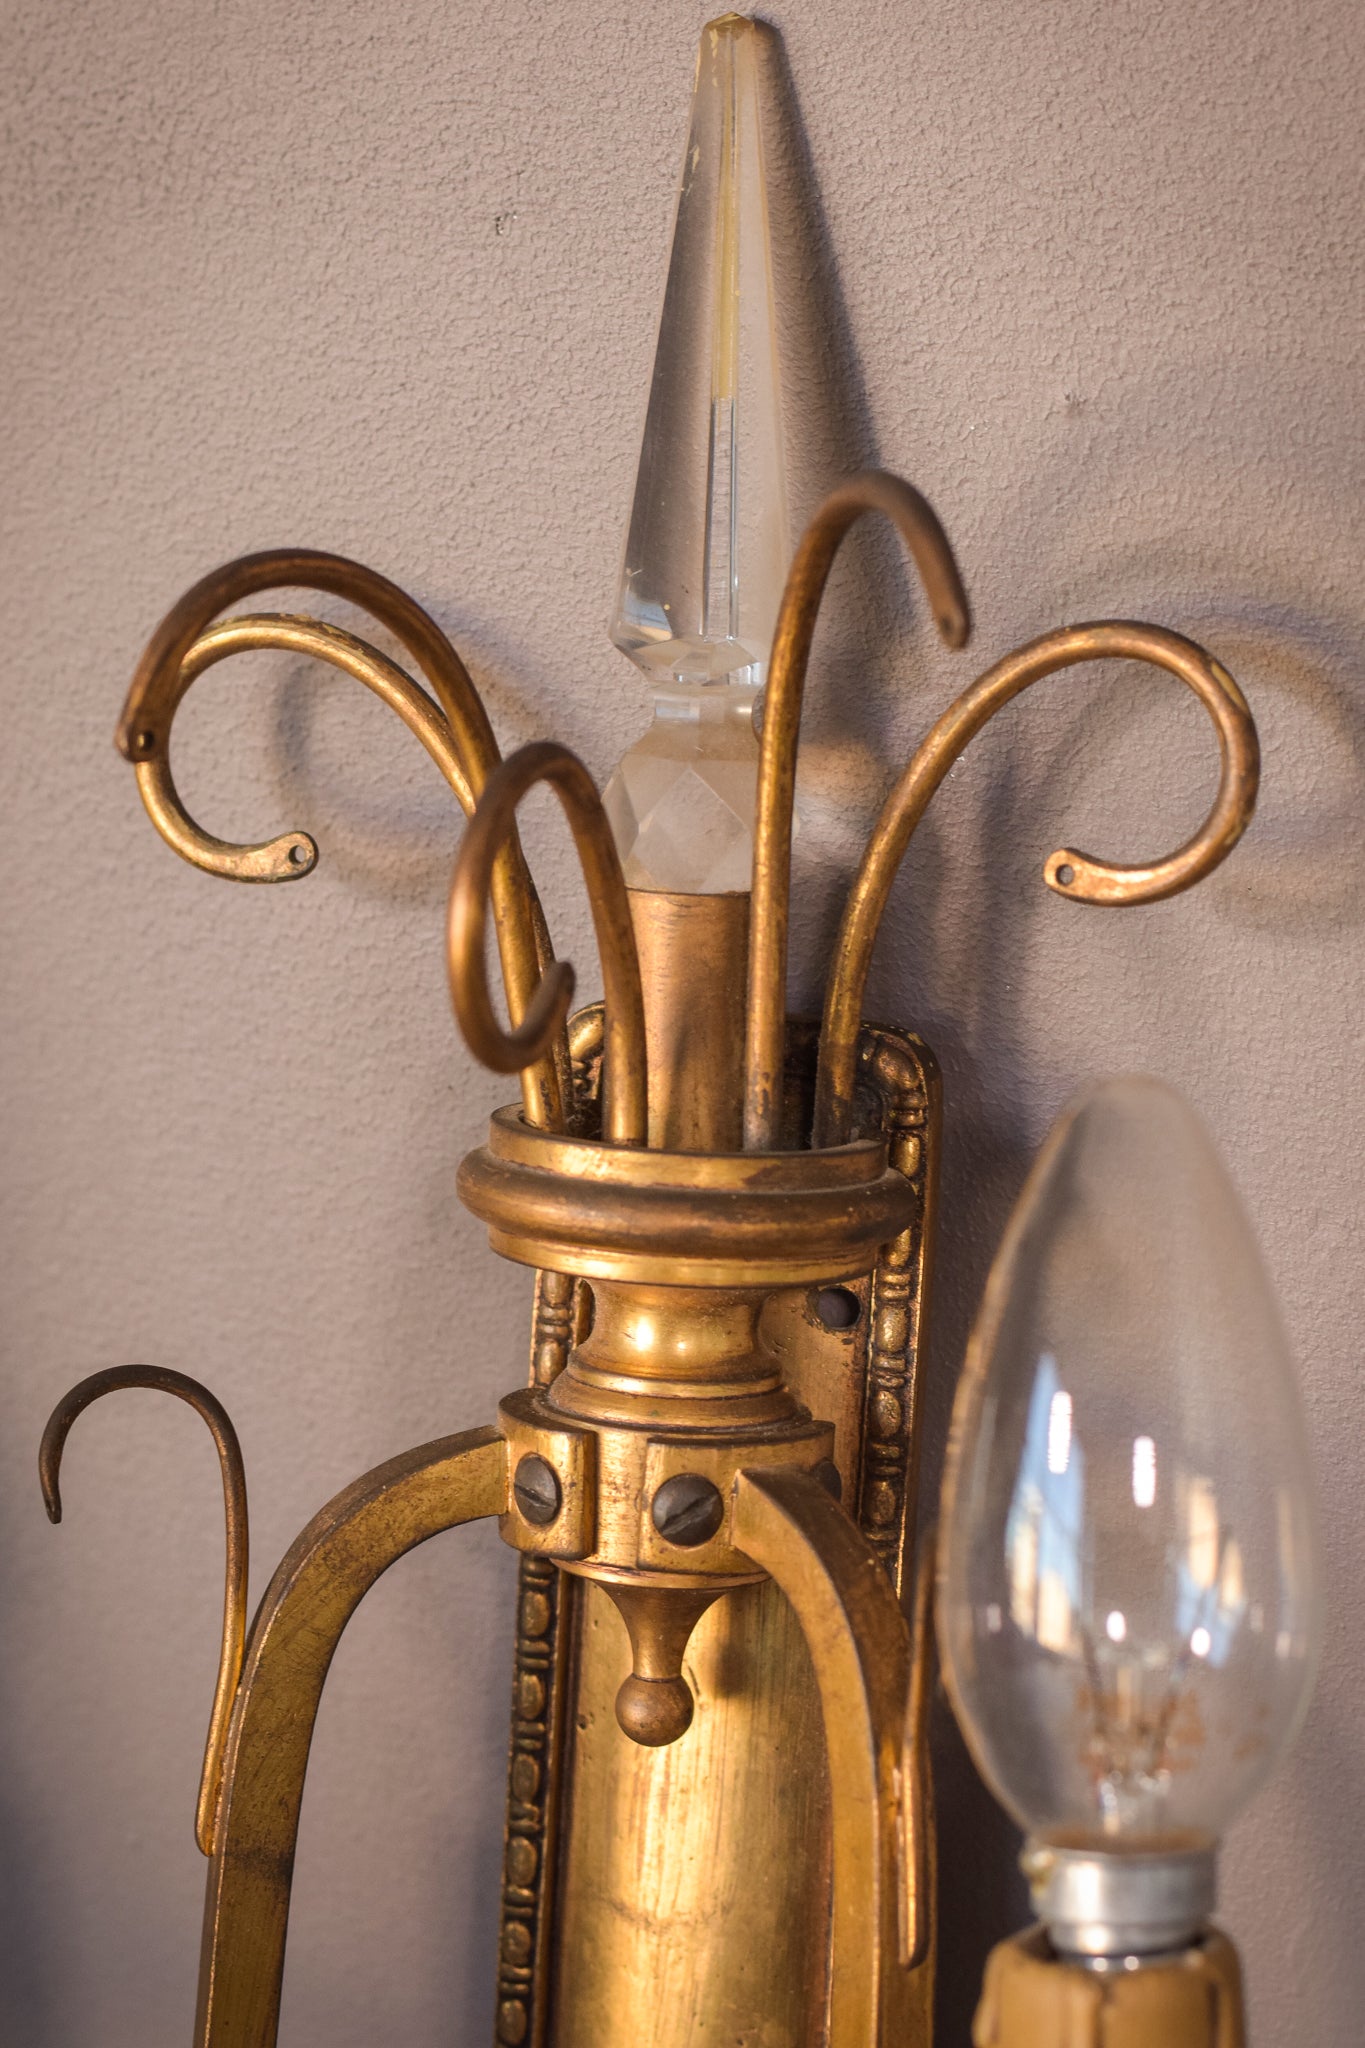 Classical High Quality Pair of Wall Lamps